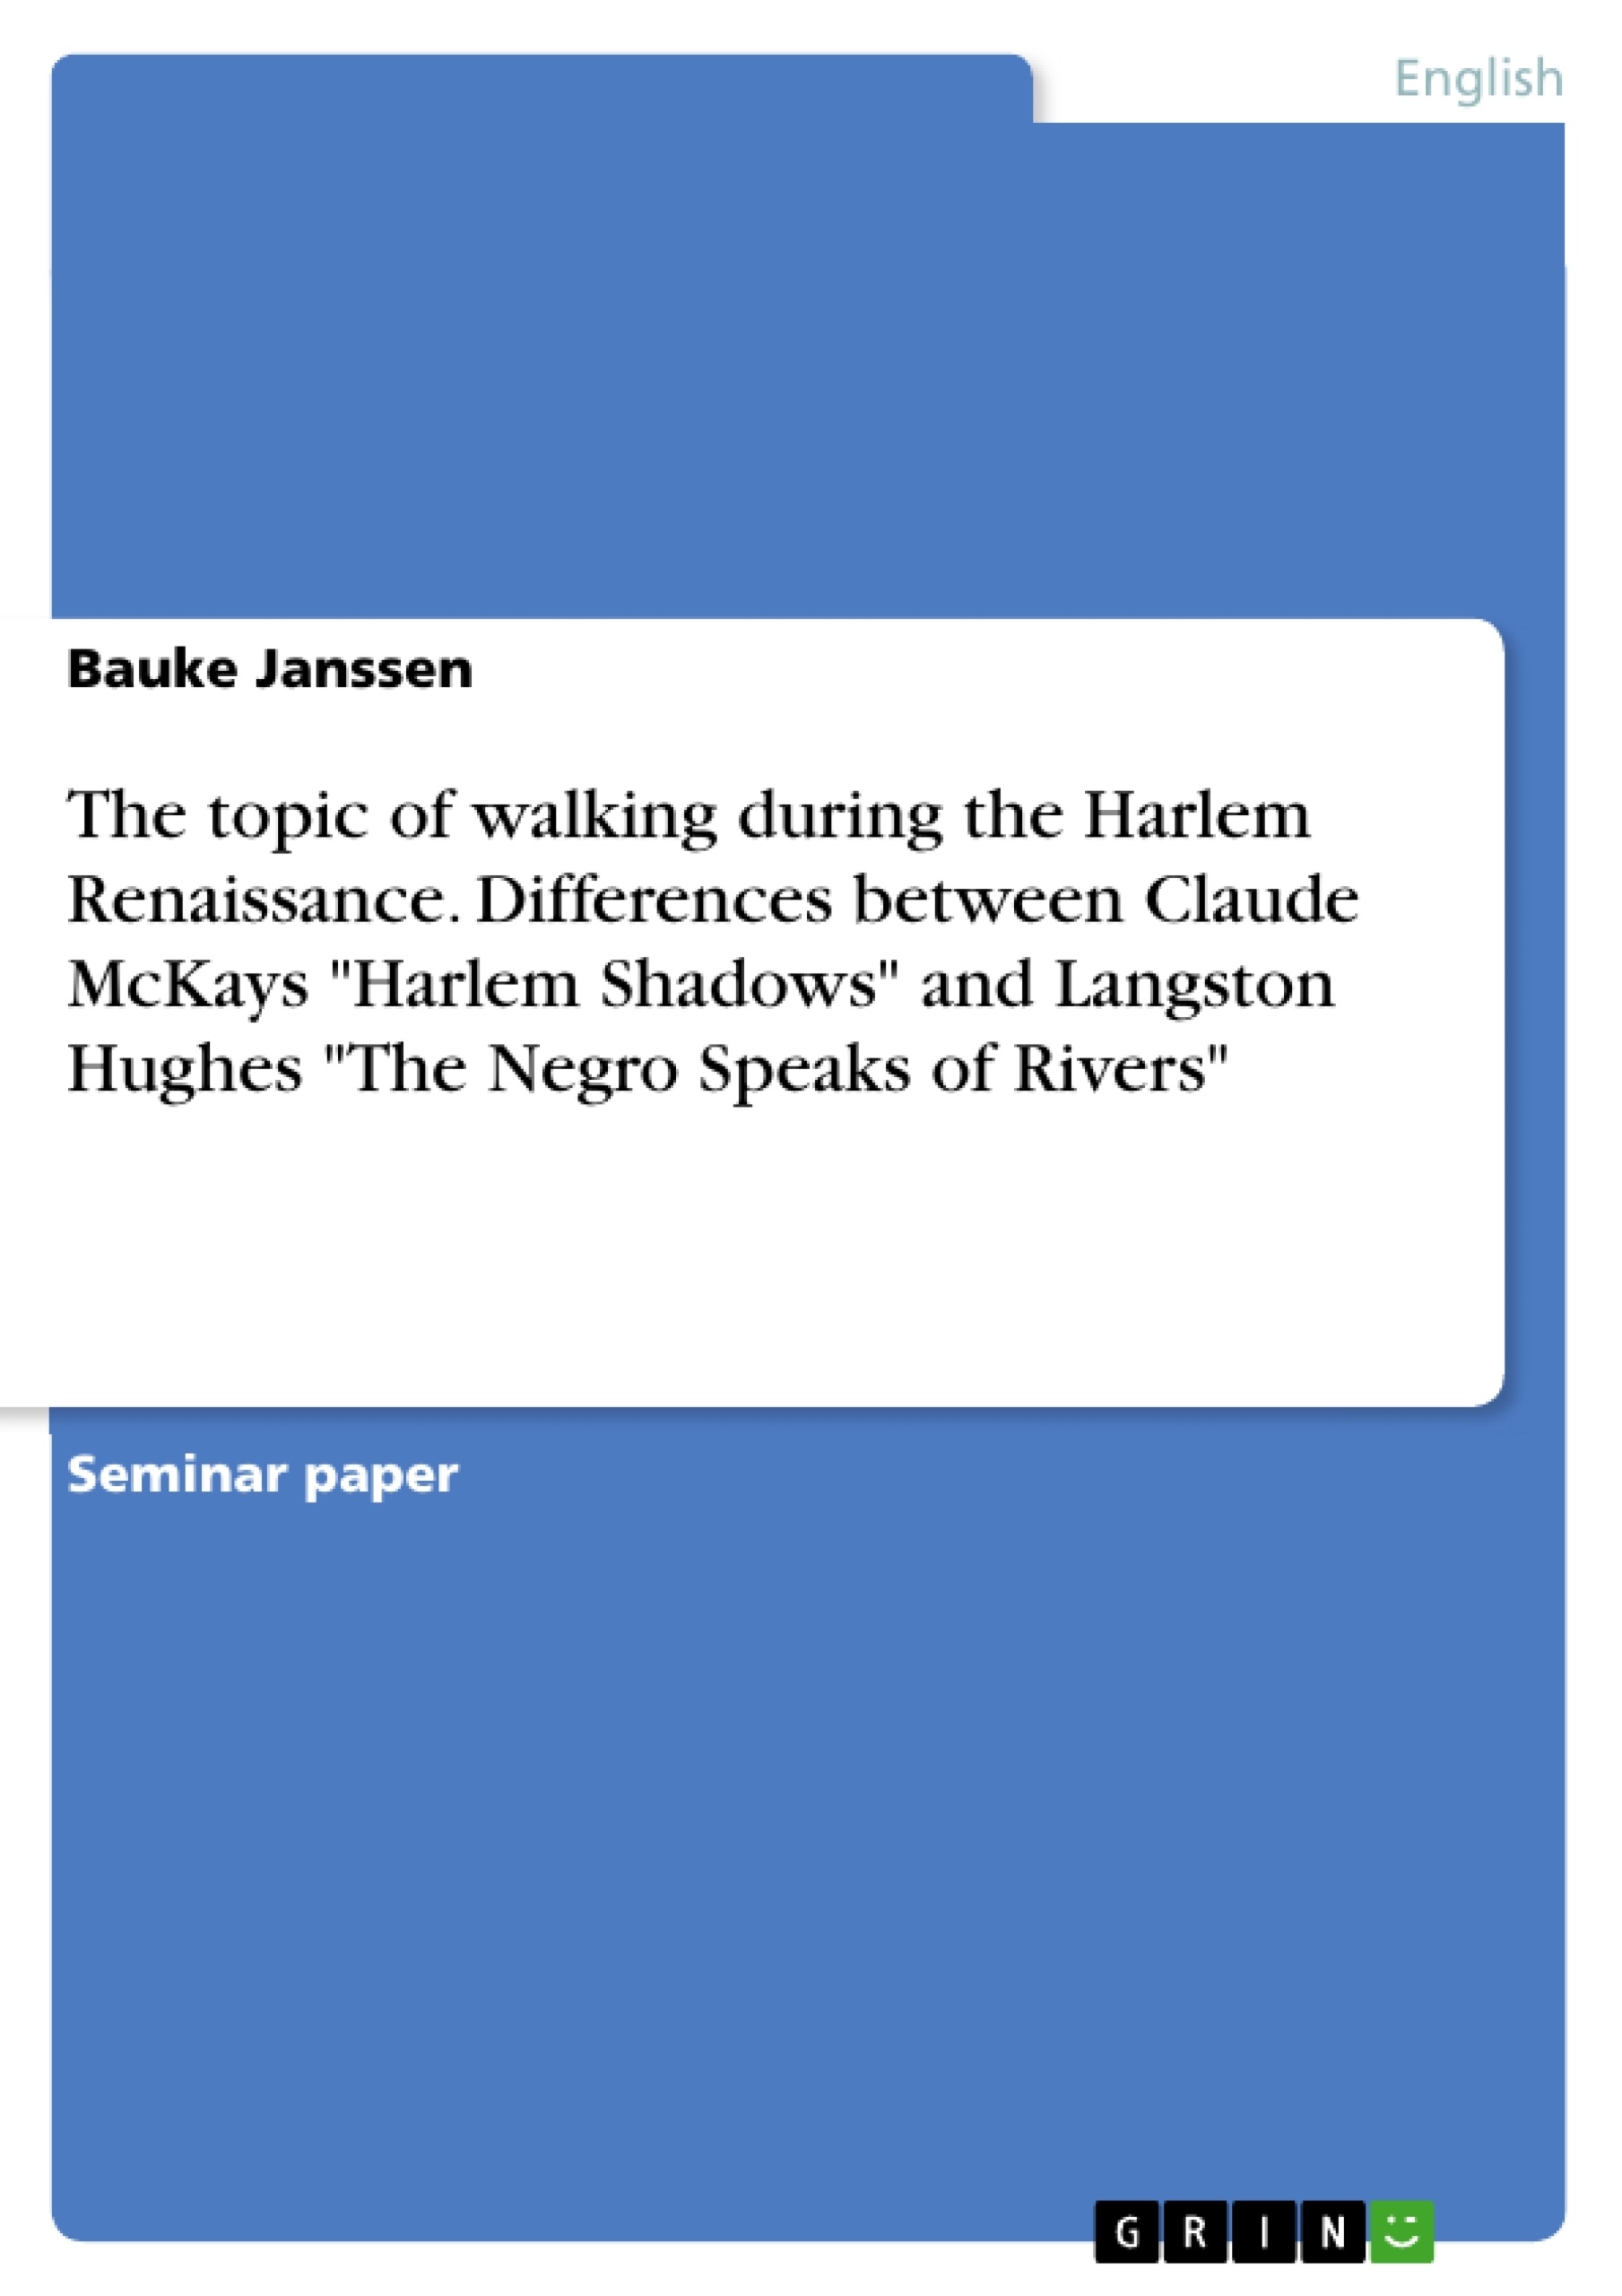 Title: The topic of walking during the Harlem Renaissance. Differences between Claude McKays "Harlem Shadows" and Langston Hughes "The Negro Speaks of Rivers"